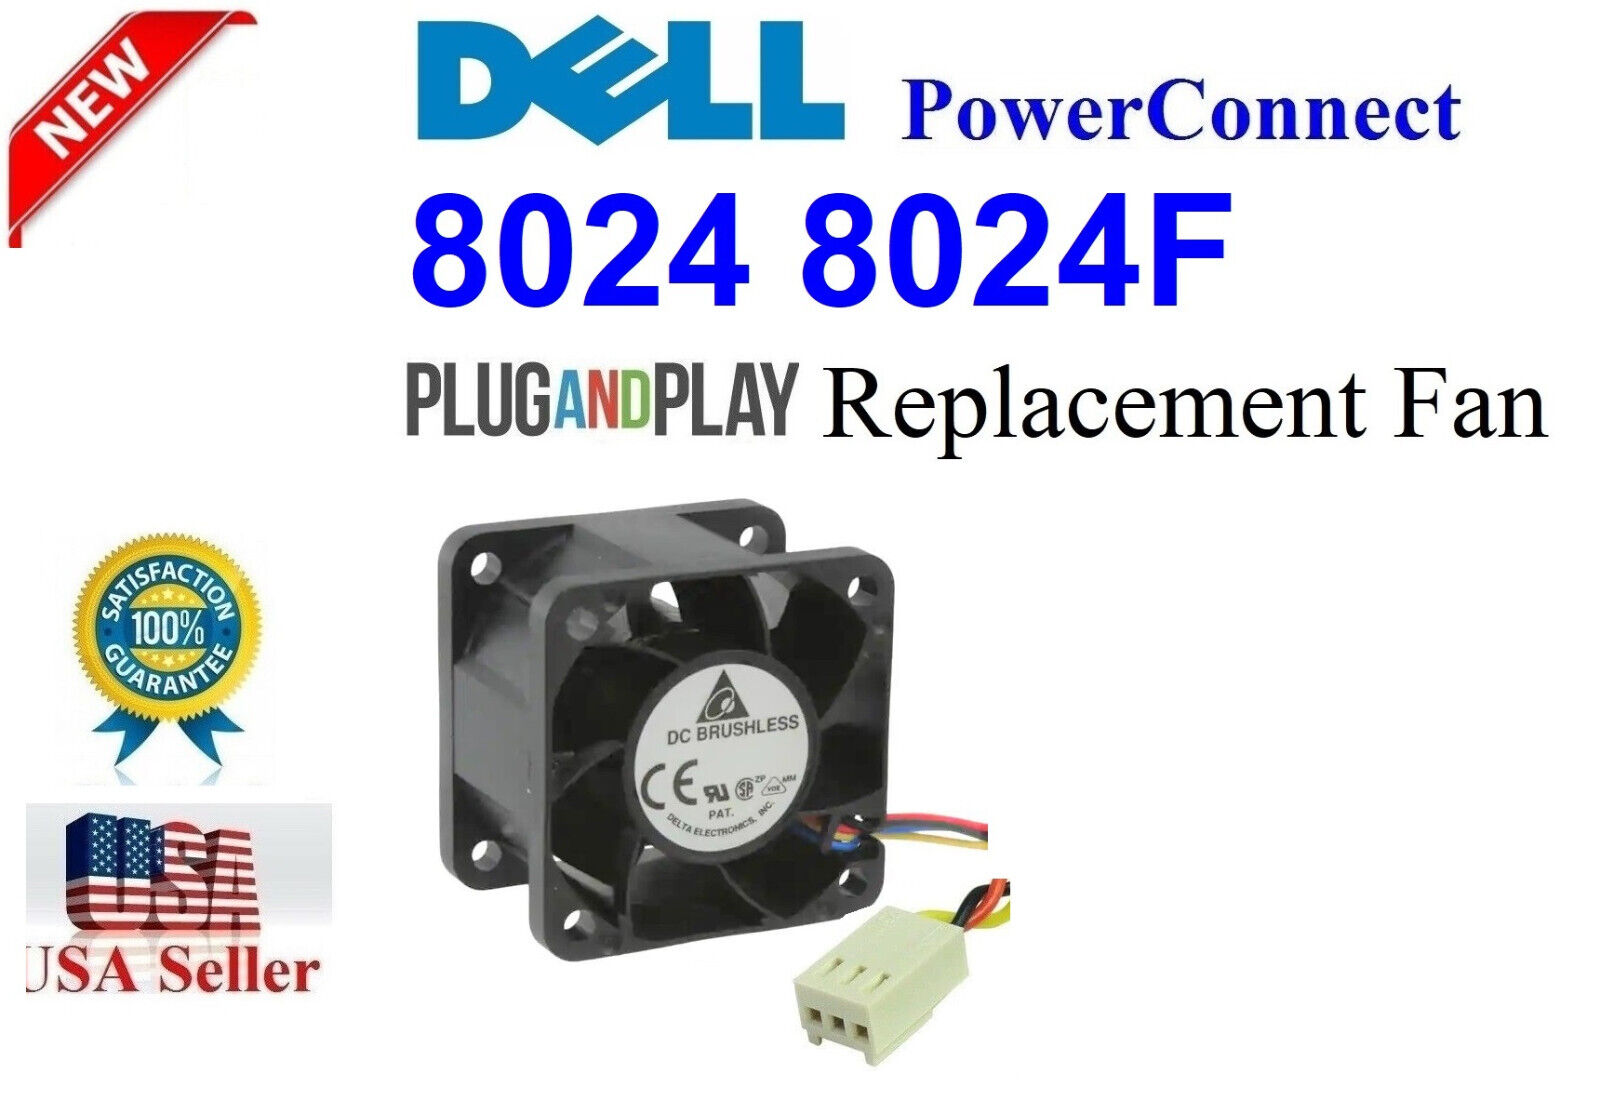 1x Replacement (Fan only) for Dell PowerConnect 8024 8024F Fan Assembly